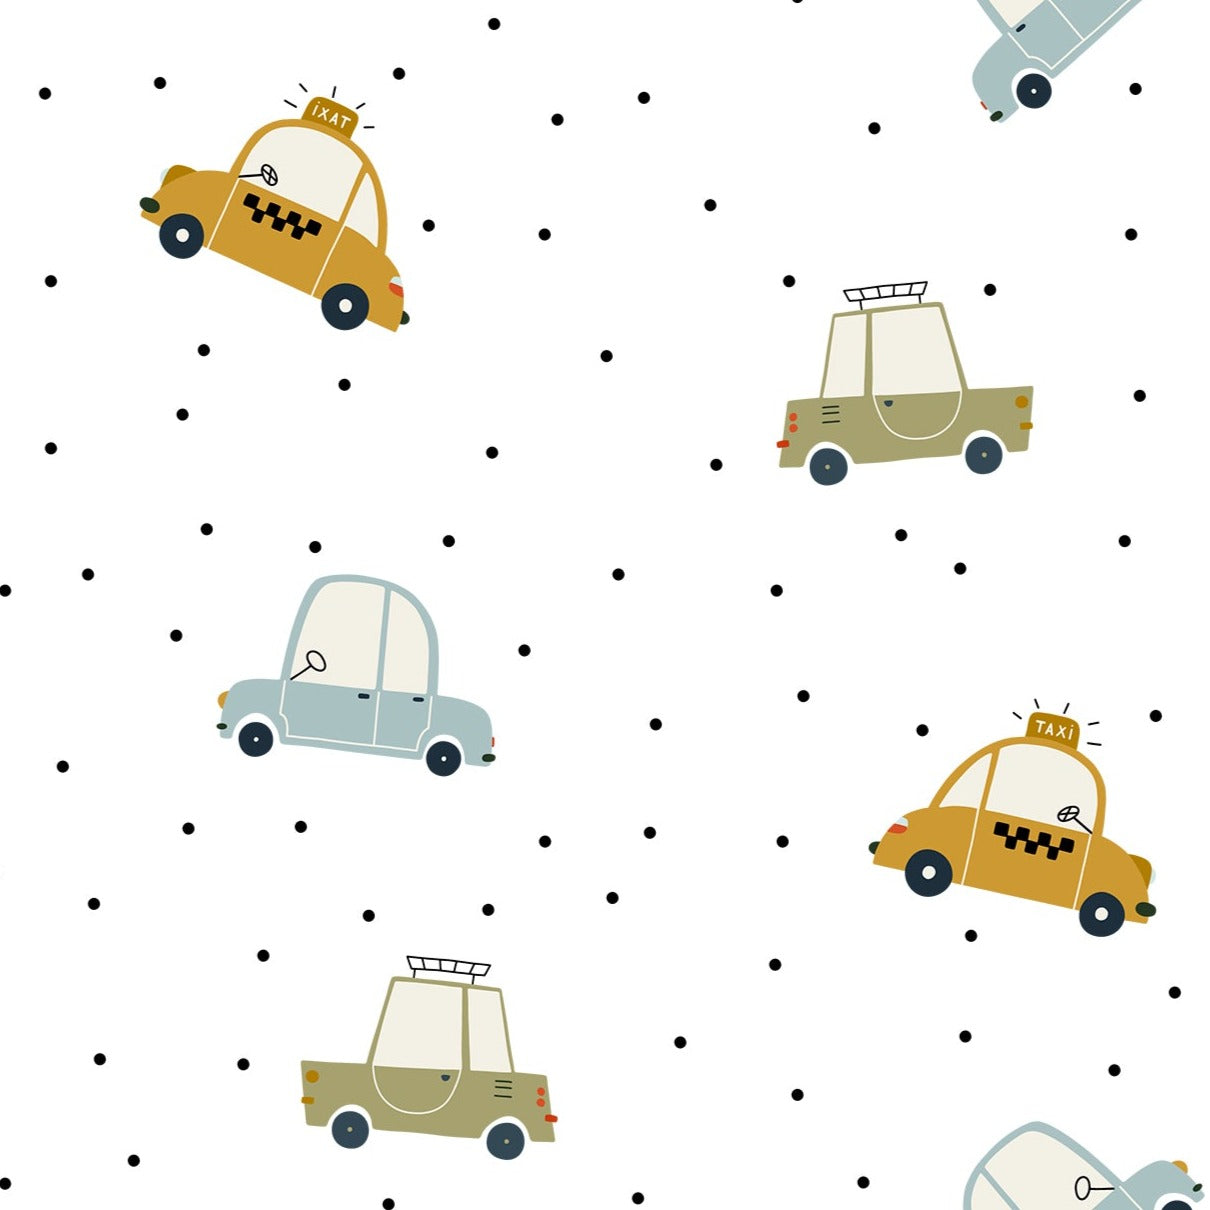 A playful pattern of cartoon-style cars in various designs, including taxis and tiny sedans, interspersed with small black dots on a white background, ideal for children's rooms.